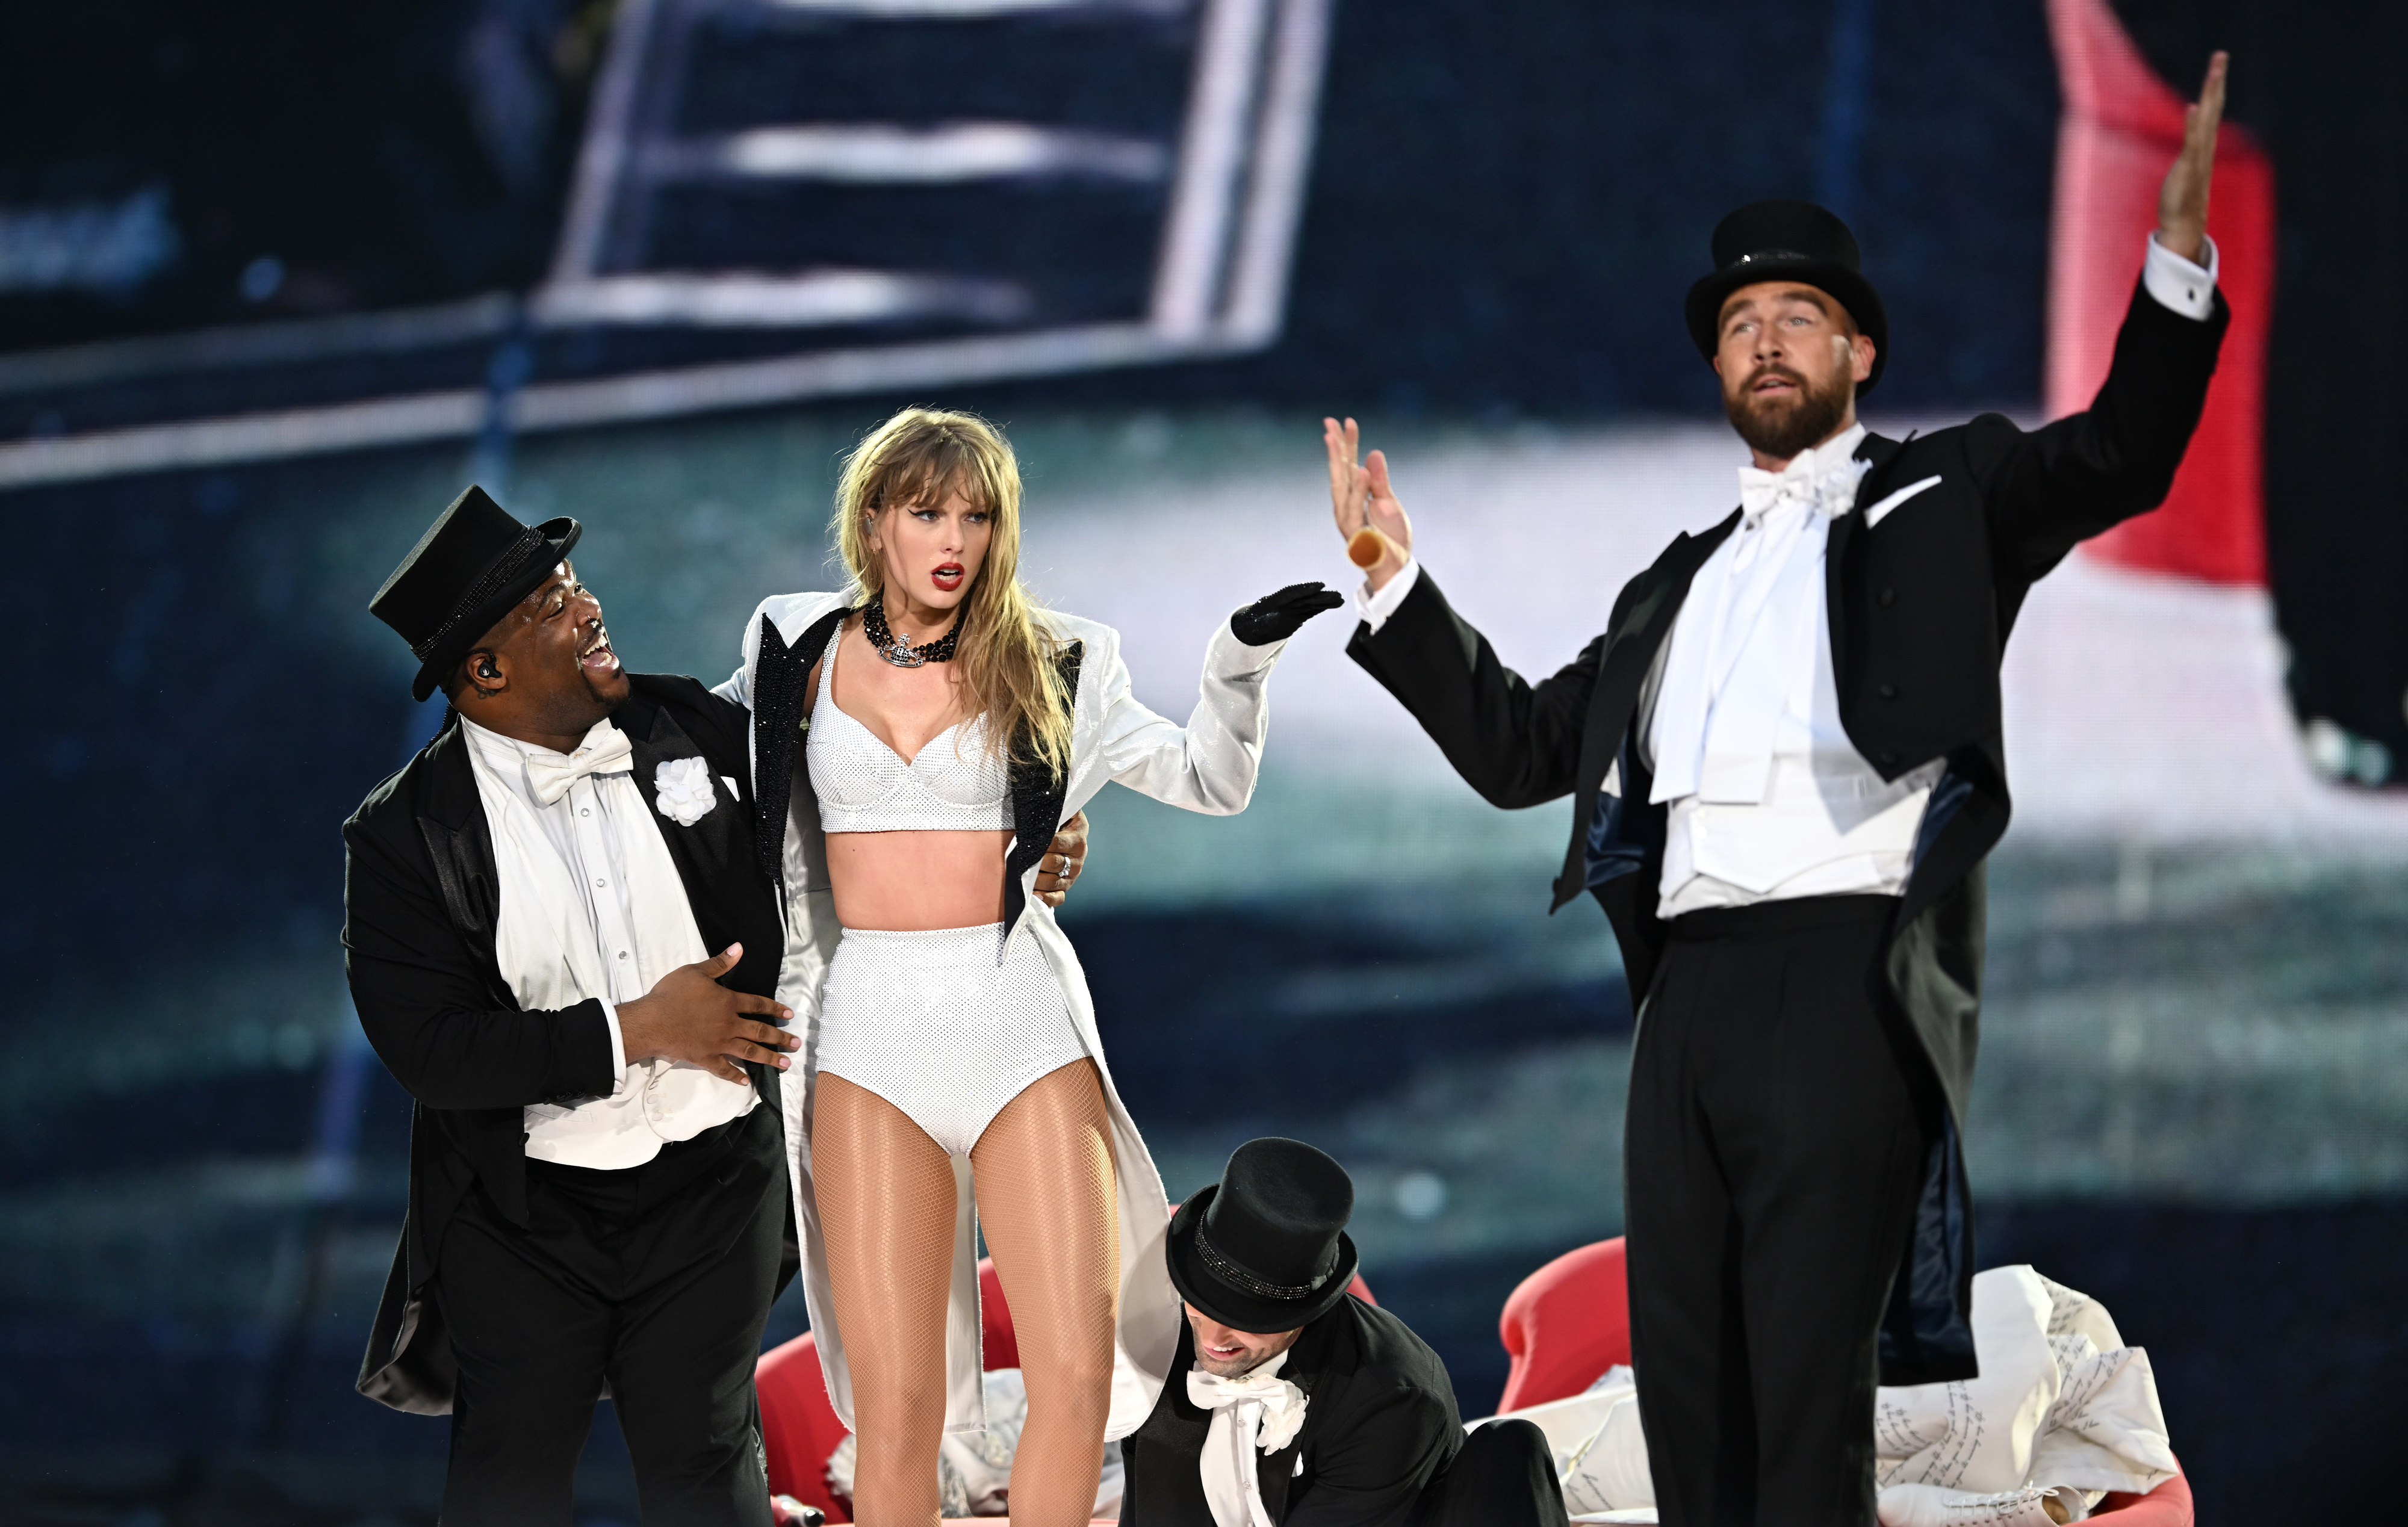 Taylor Swift performs on stage dressed in a white costume, accompanied by dancers in black tuxedos and top hats